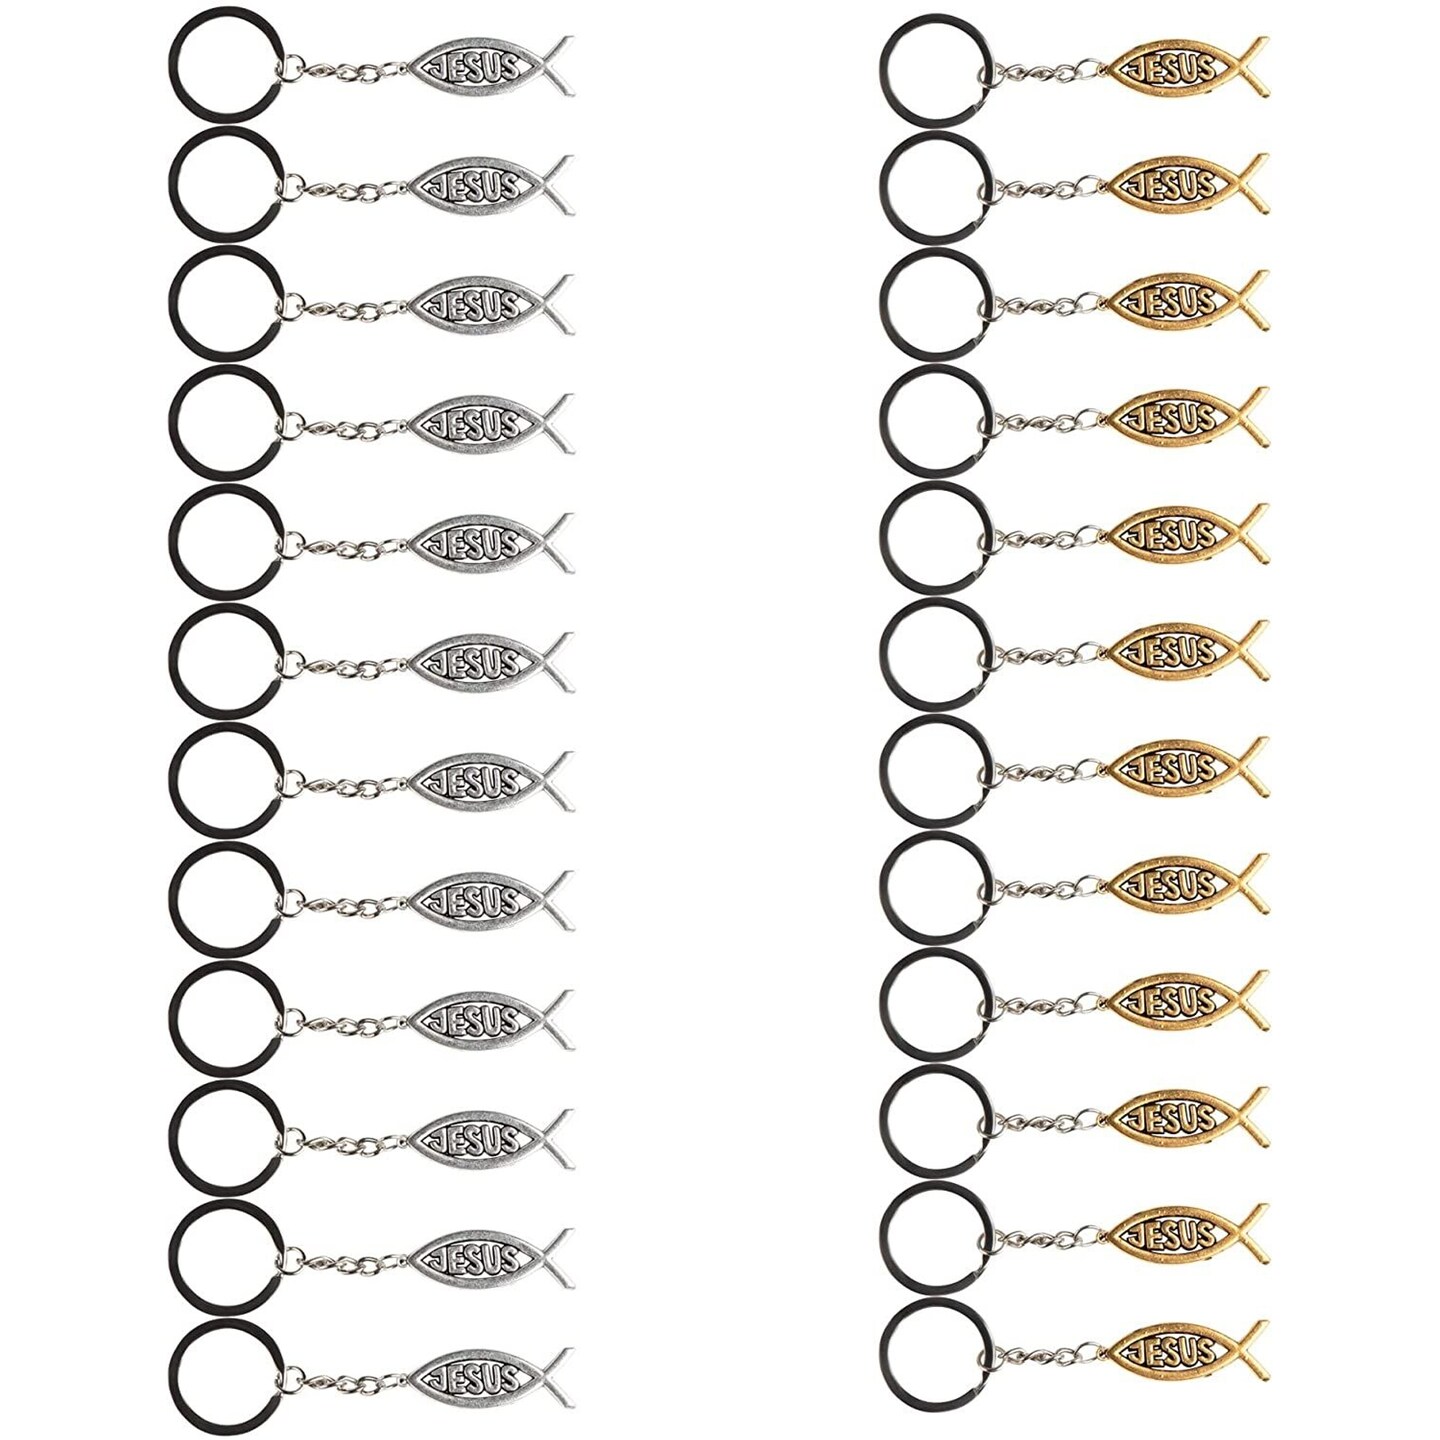 24 Pack Metal Jesus Fish Keychains, Christian Religious Gifts for Women and  Men, Bulk Key Rings for Easter Party, Family Reunion Favors (Silver and  Gold-Colored)